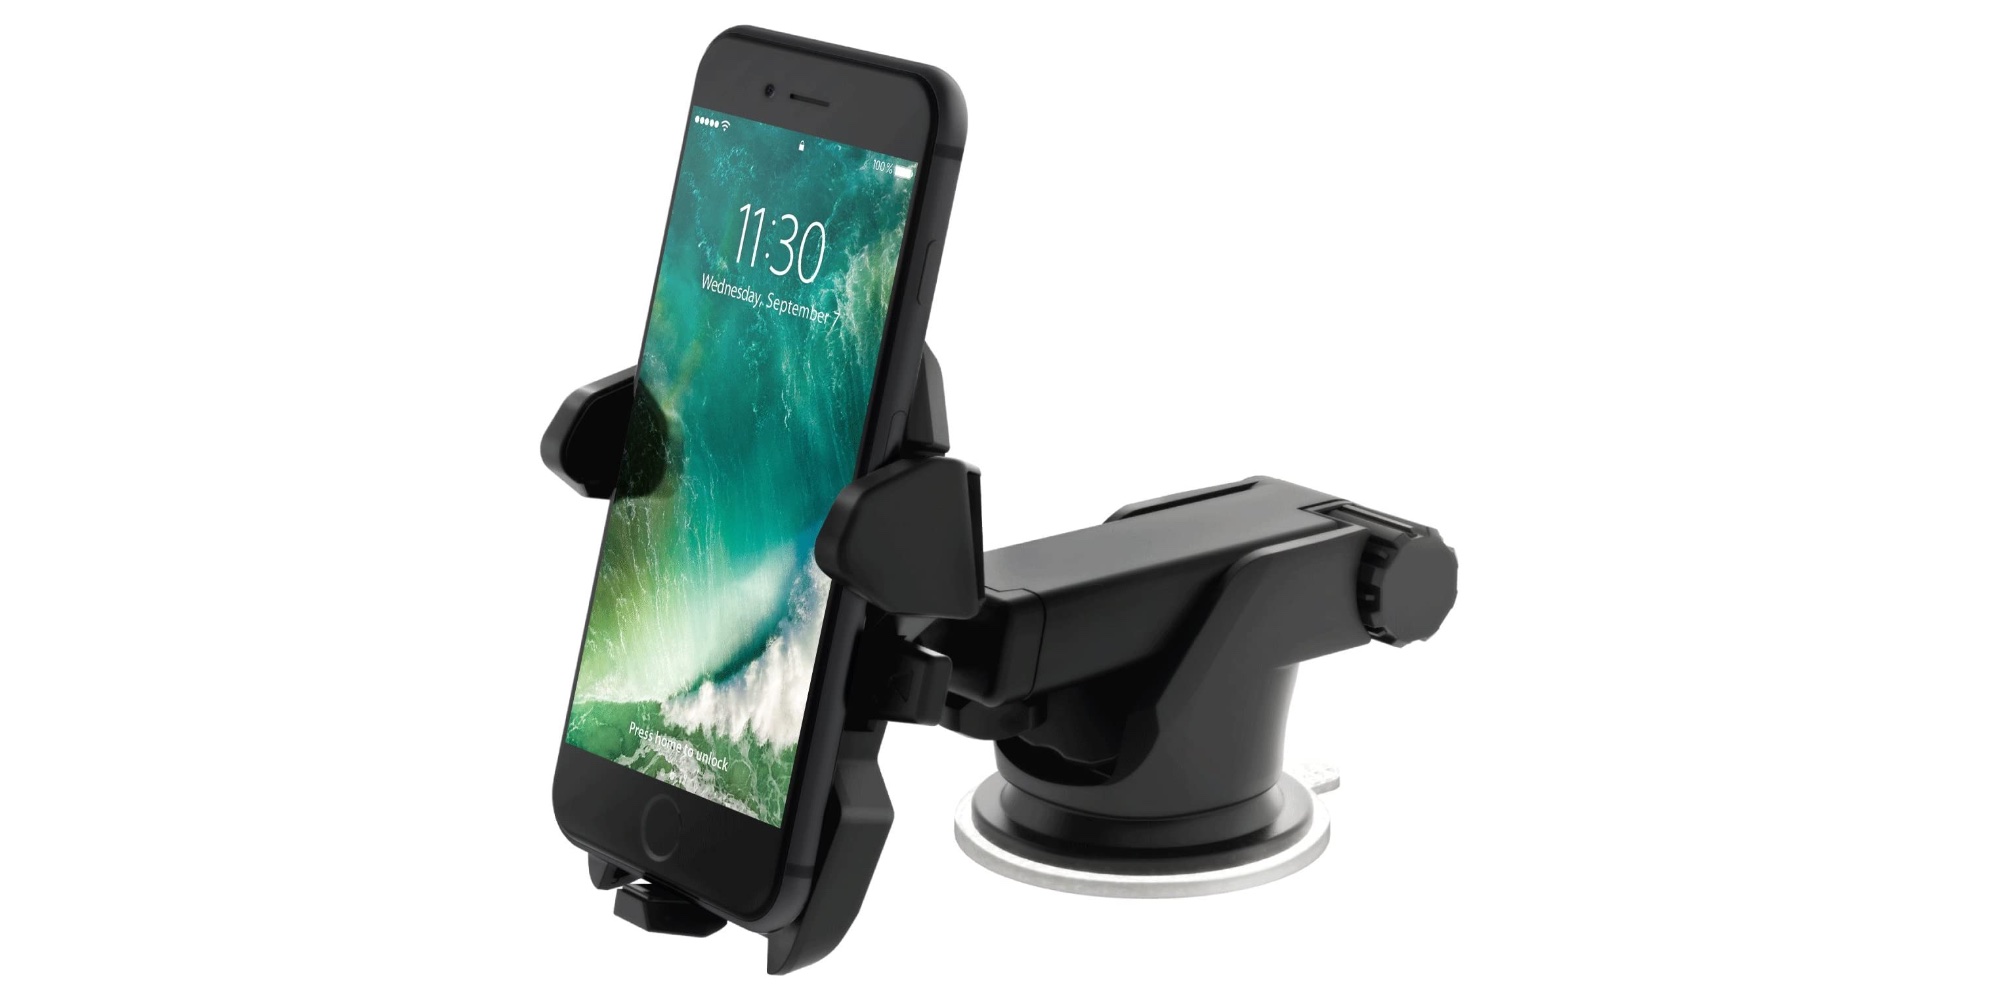 Smartphone Accessories: iOttie Easy One Touch 2 Car Mount $11